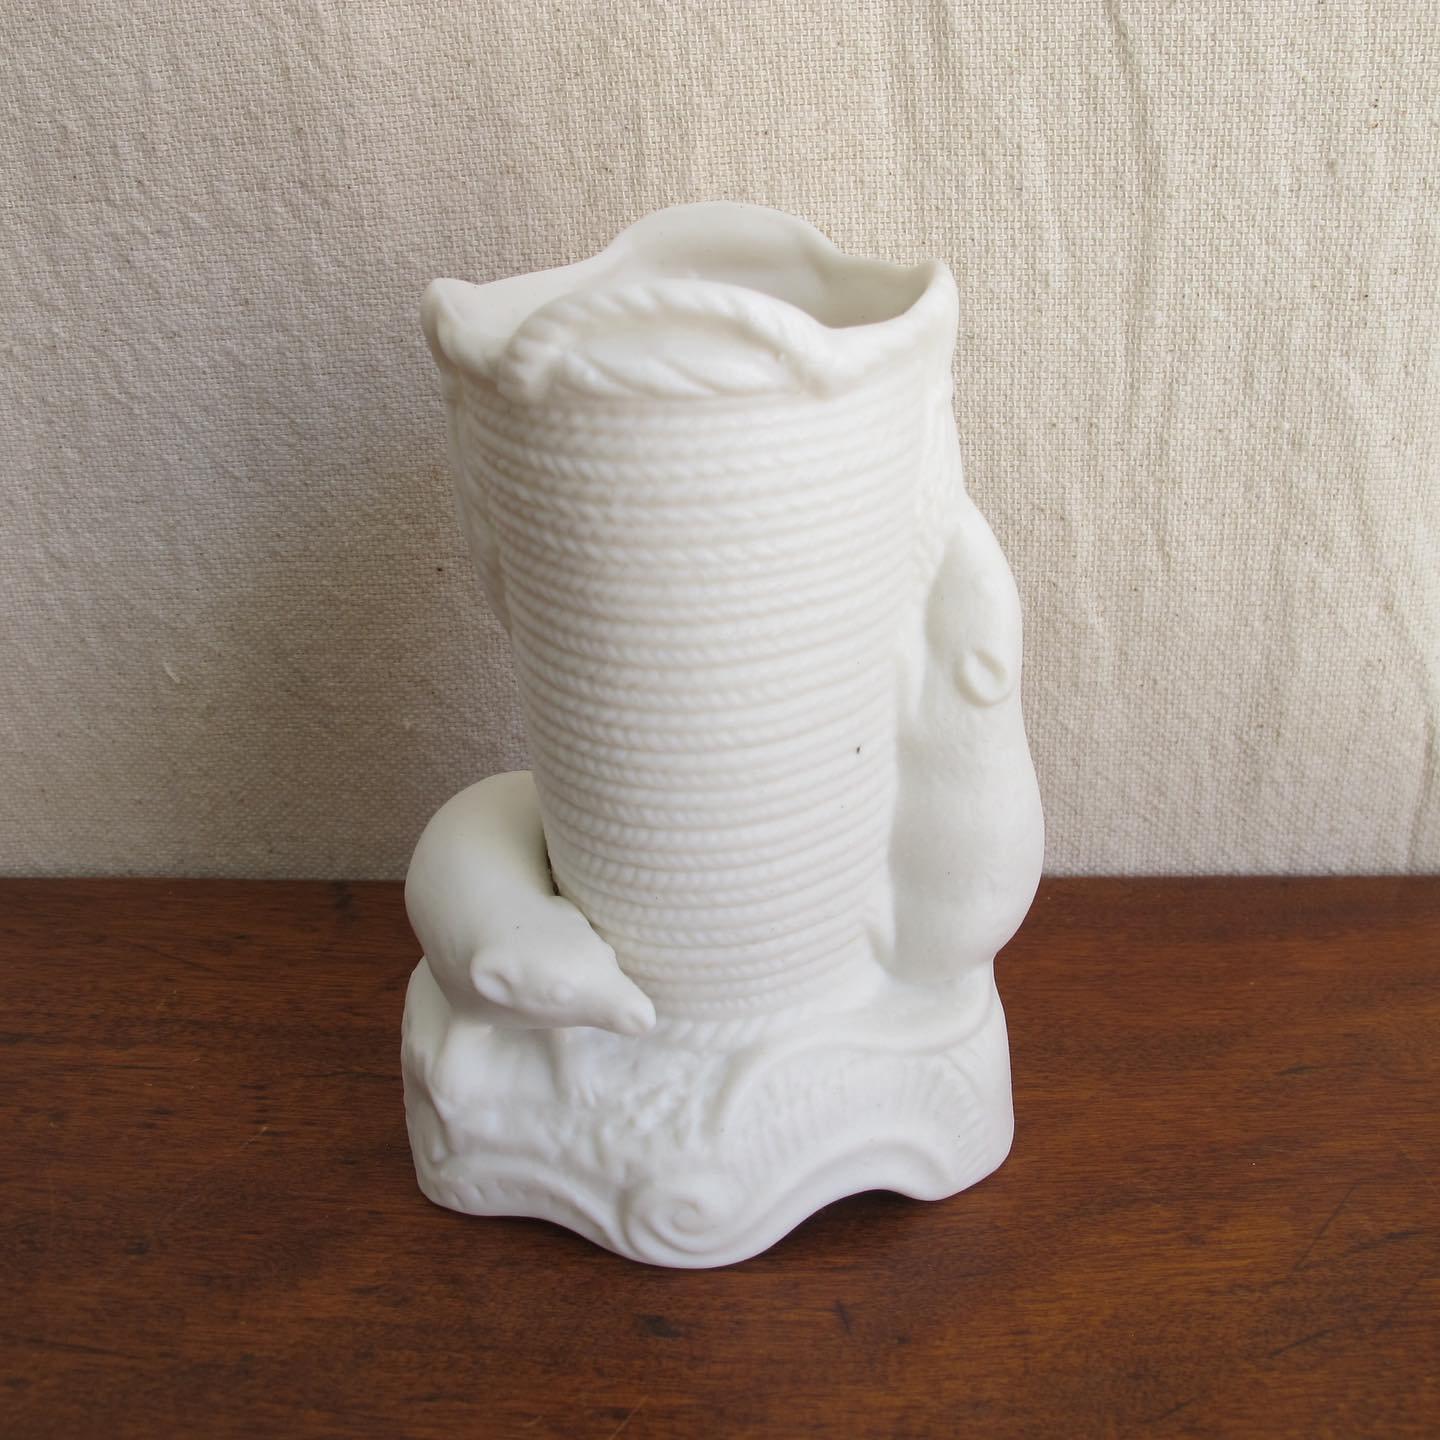 Antique Parian porcelain vase with figural mice, exploring a coil of rope, extremely rare, c. 1860 1870